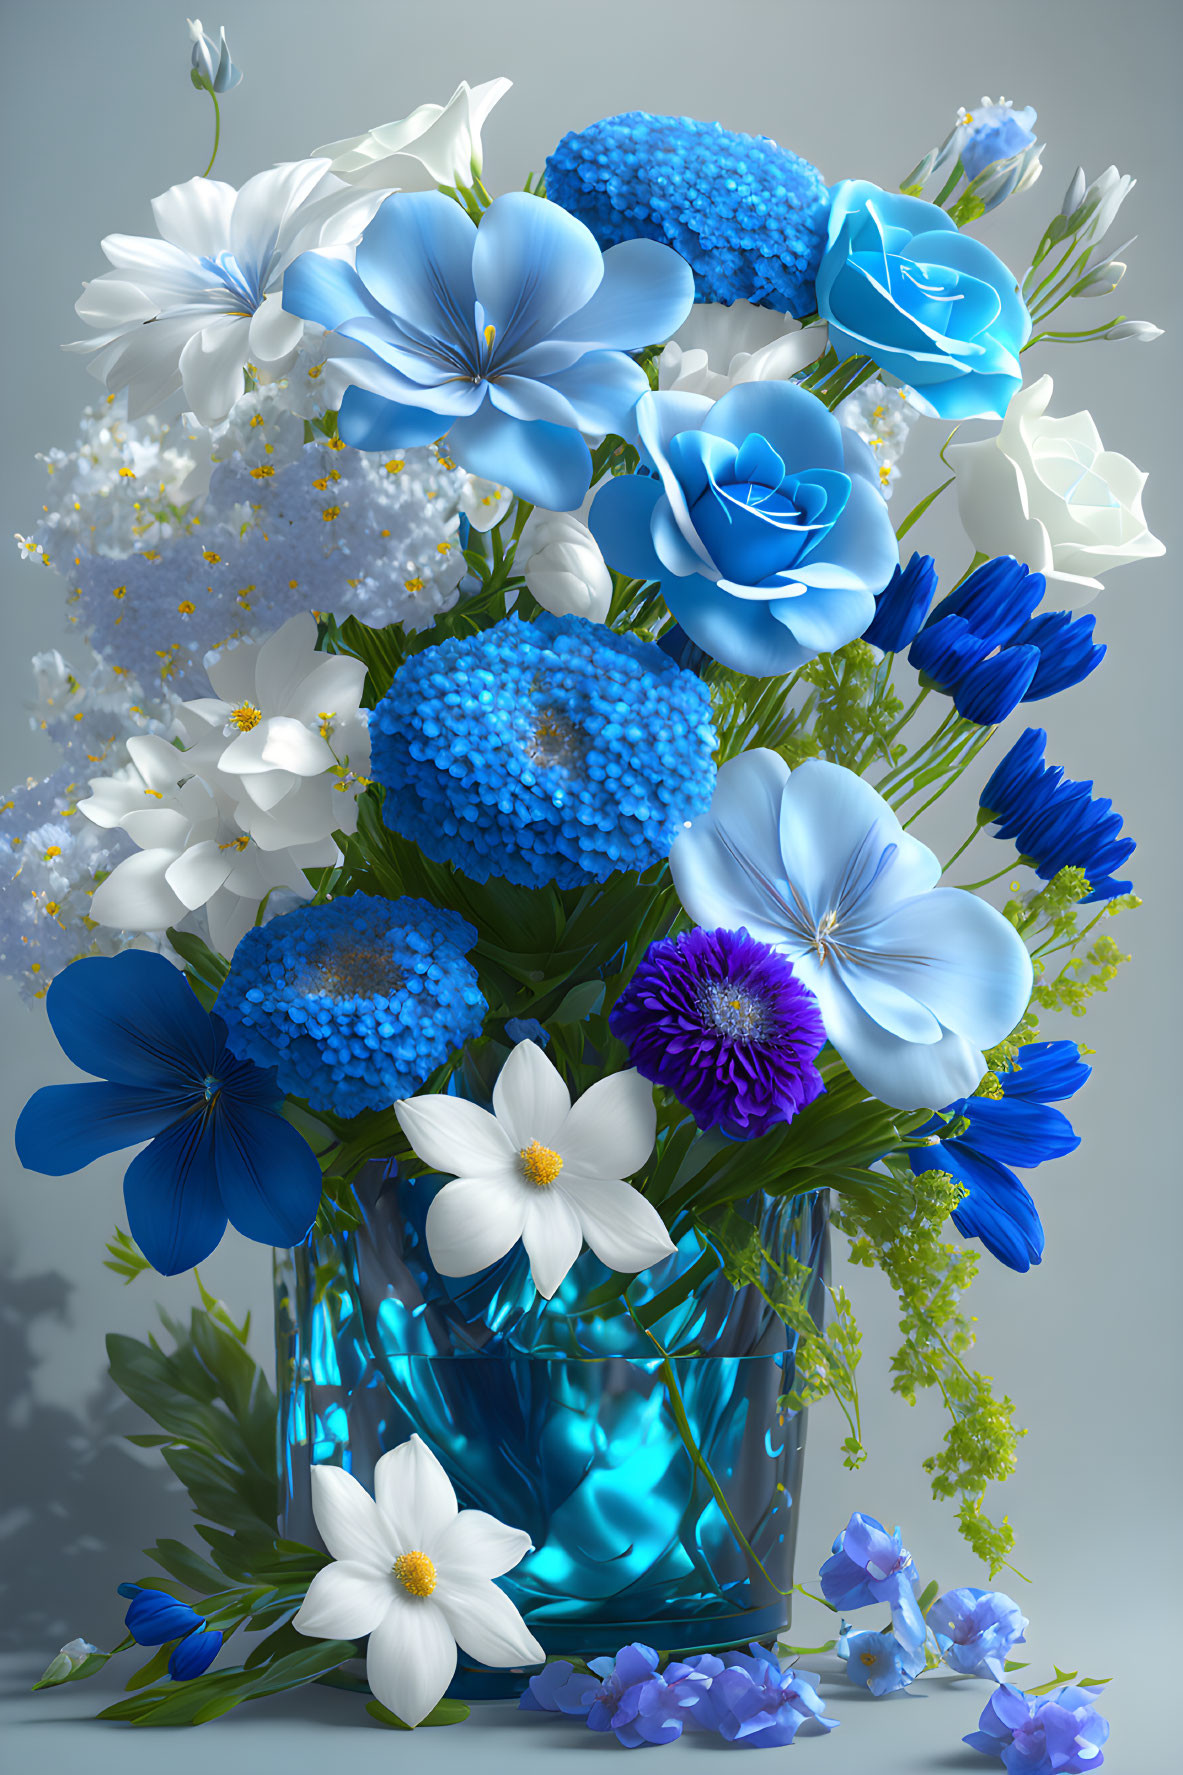 Blue and White Flower Bouquet in Translucent Vase on Neutral Background